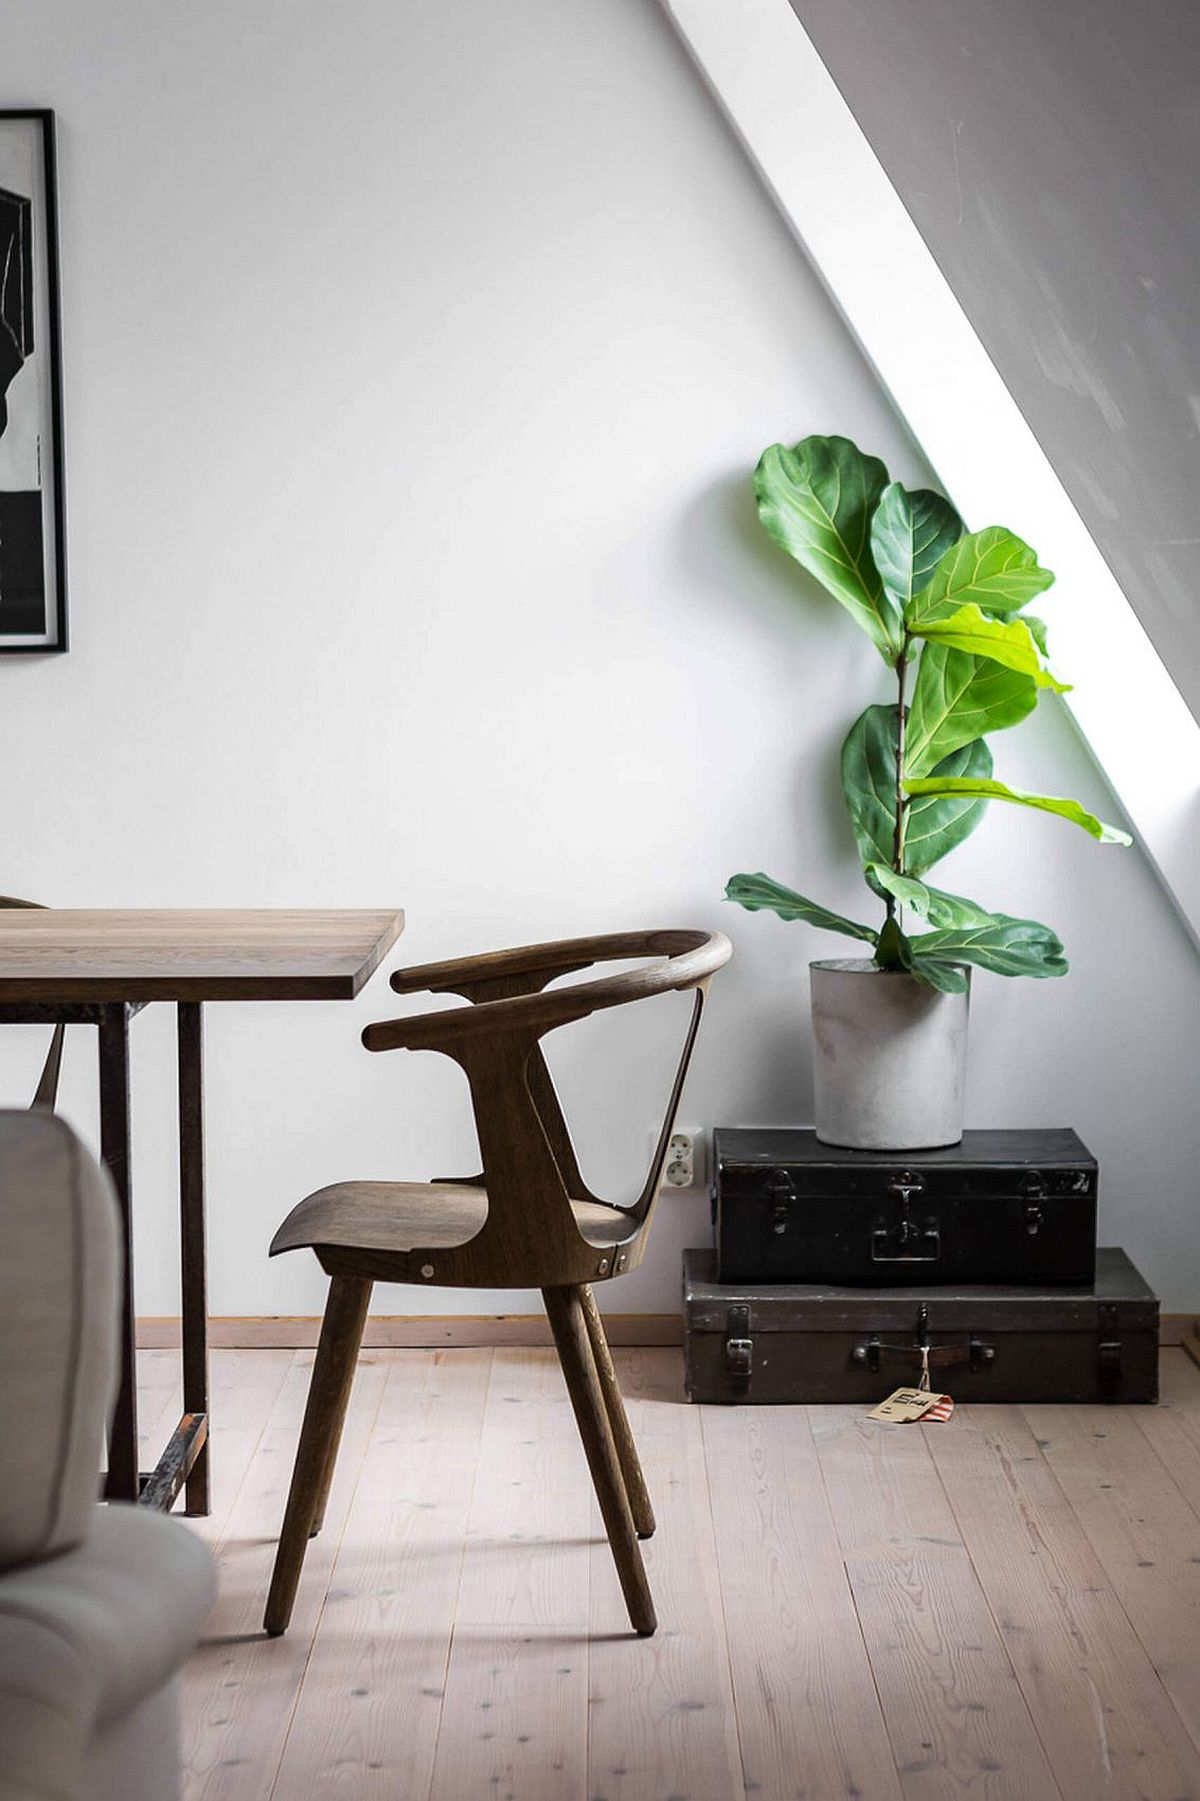 Trunks in the corner with a plant make a fun addition to the dining space